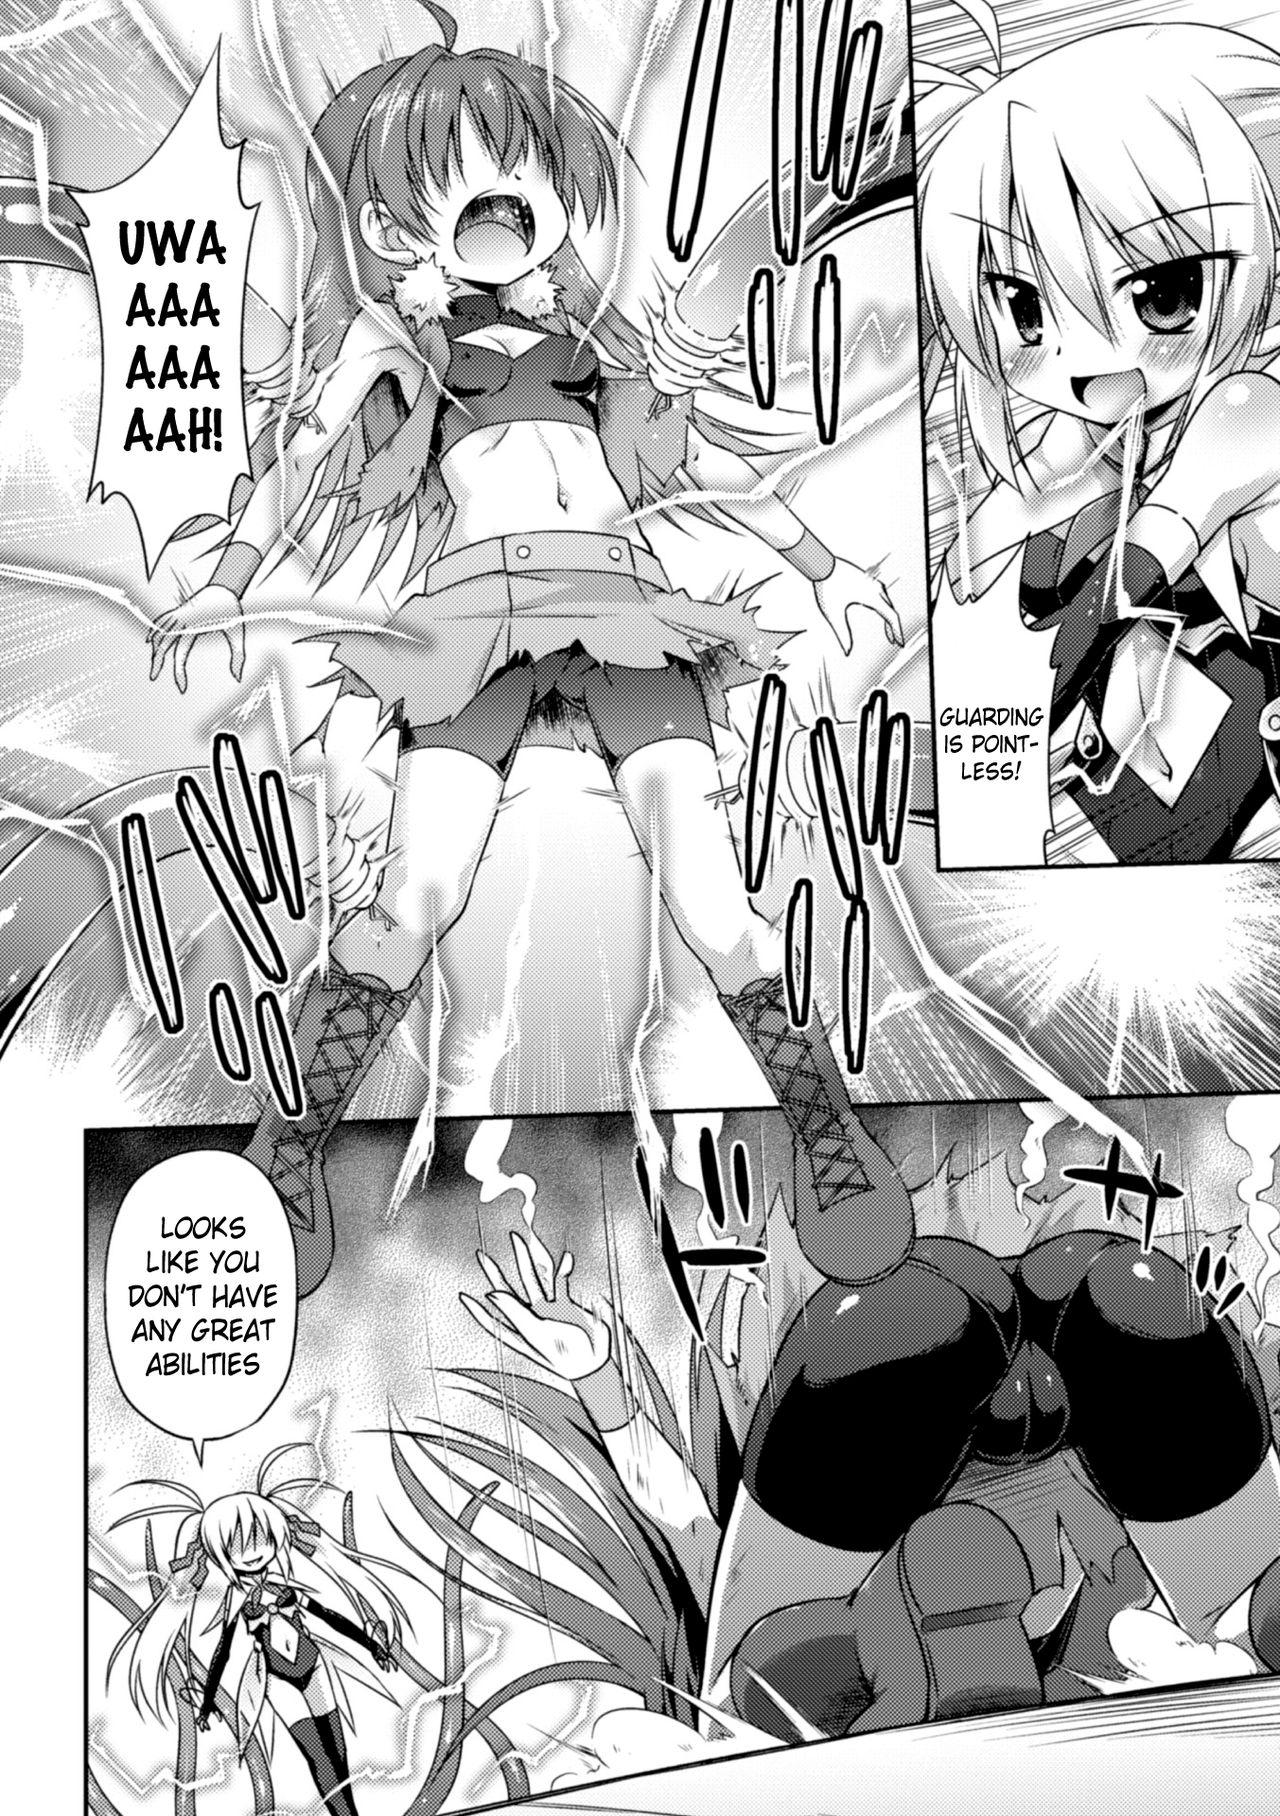 Wet This World is all Tentacles | Konoyo wa Subete Tentacle! Footfetish - Page 10